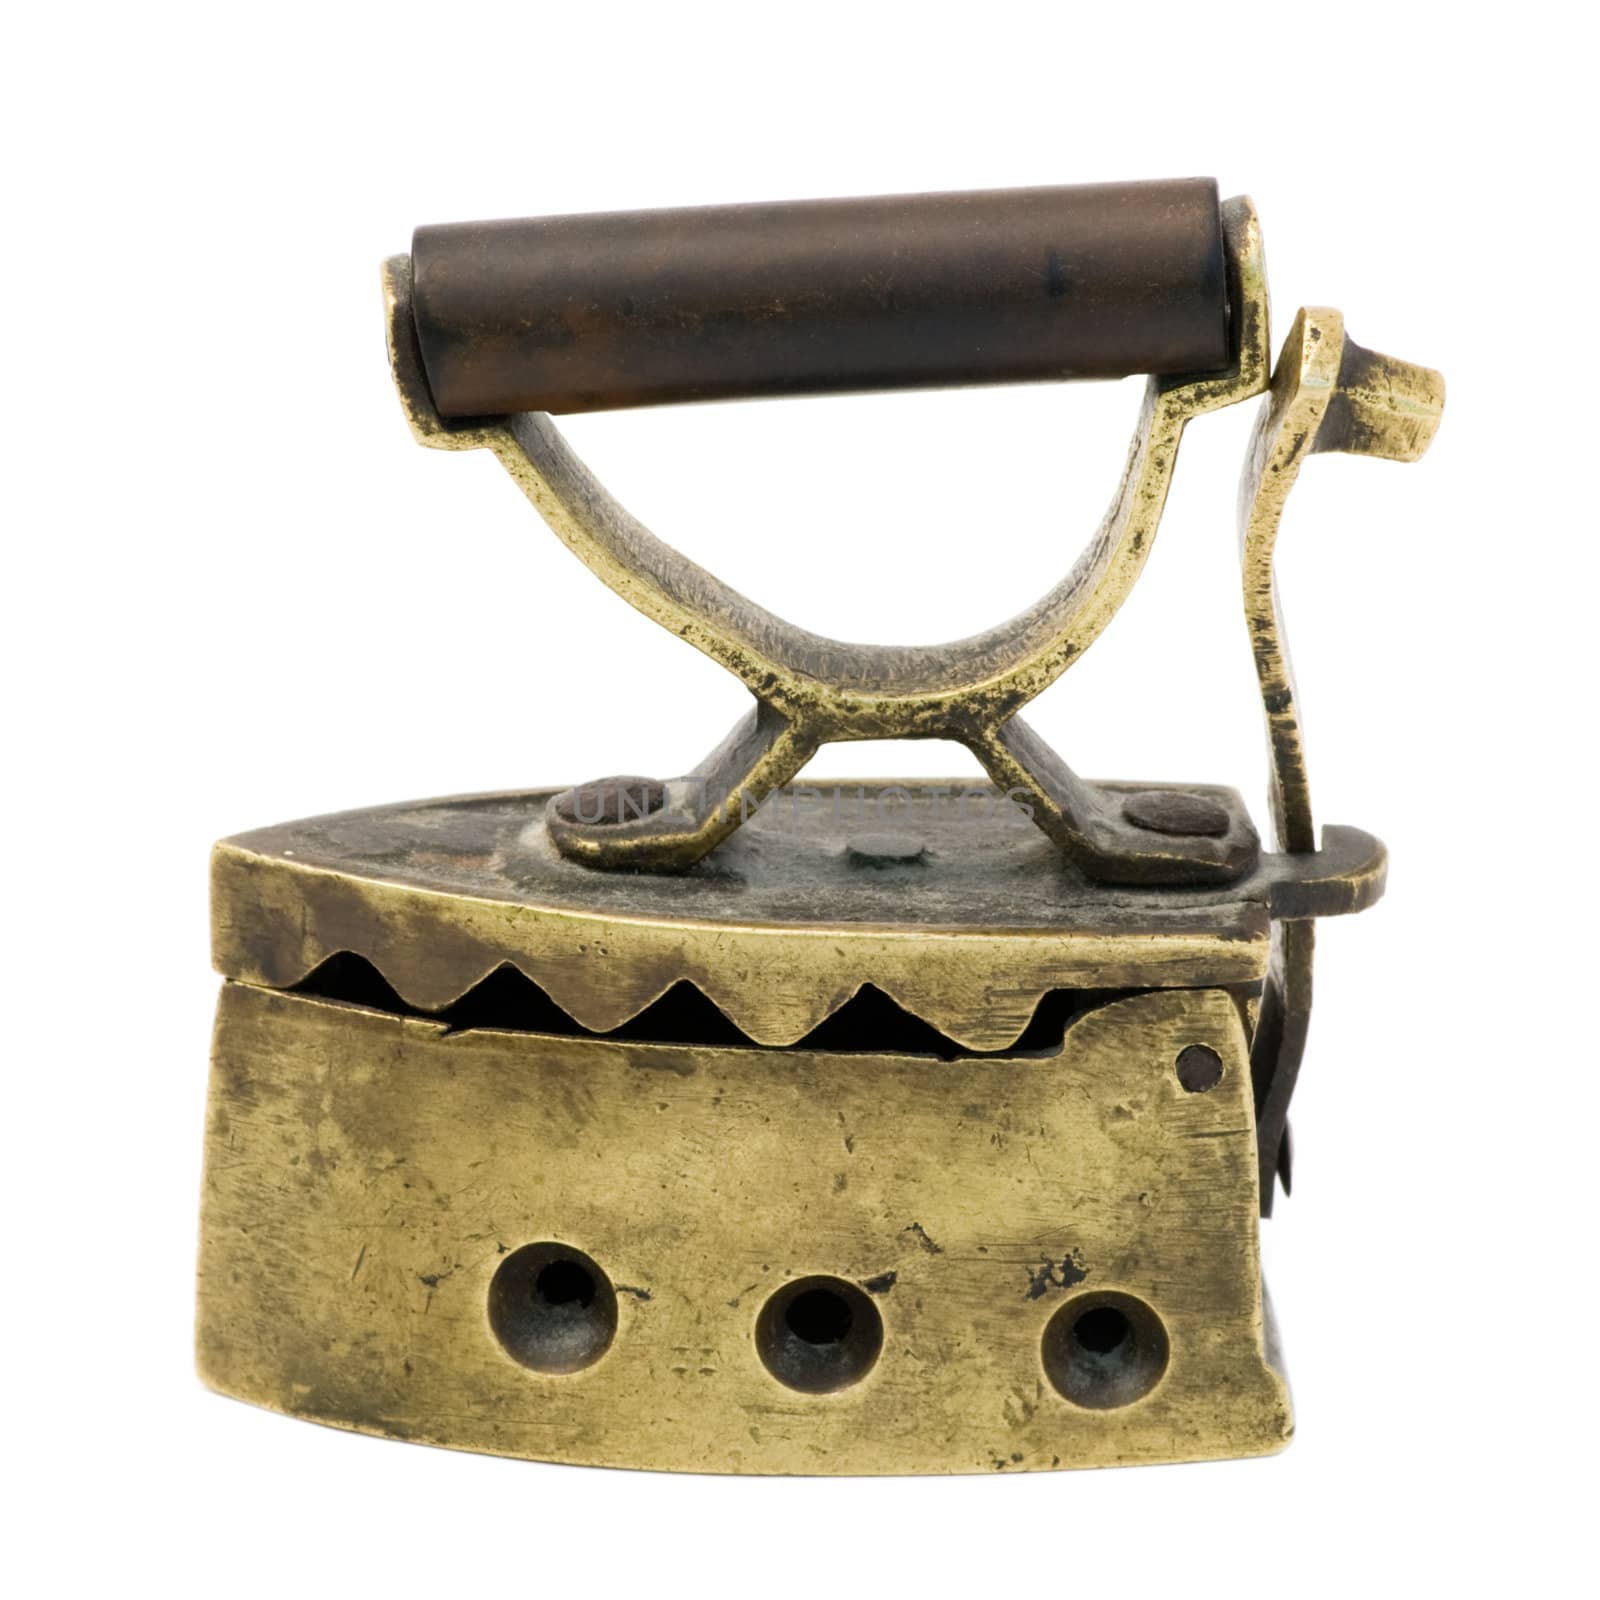 Vintage Miniature Charcoal Iron by naumoid